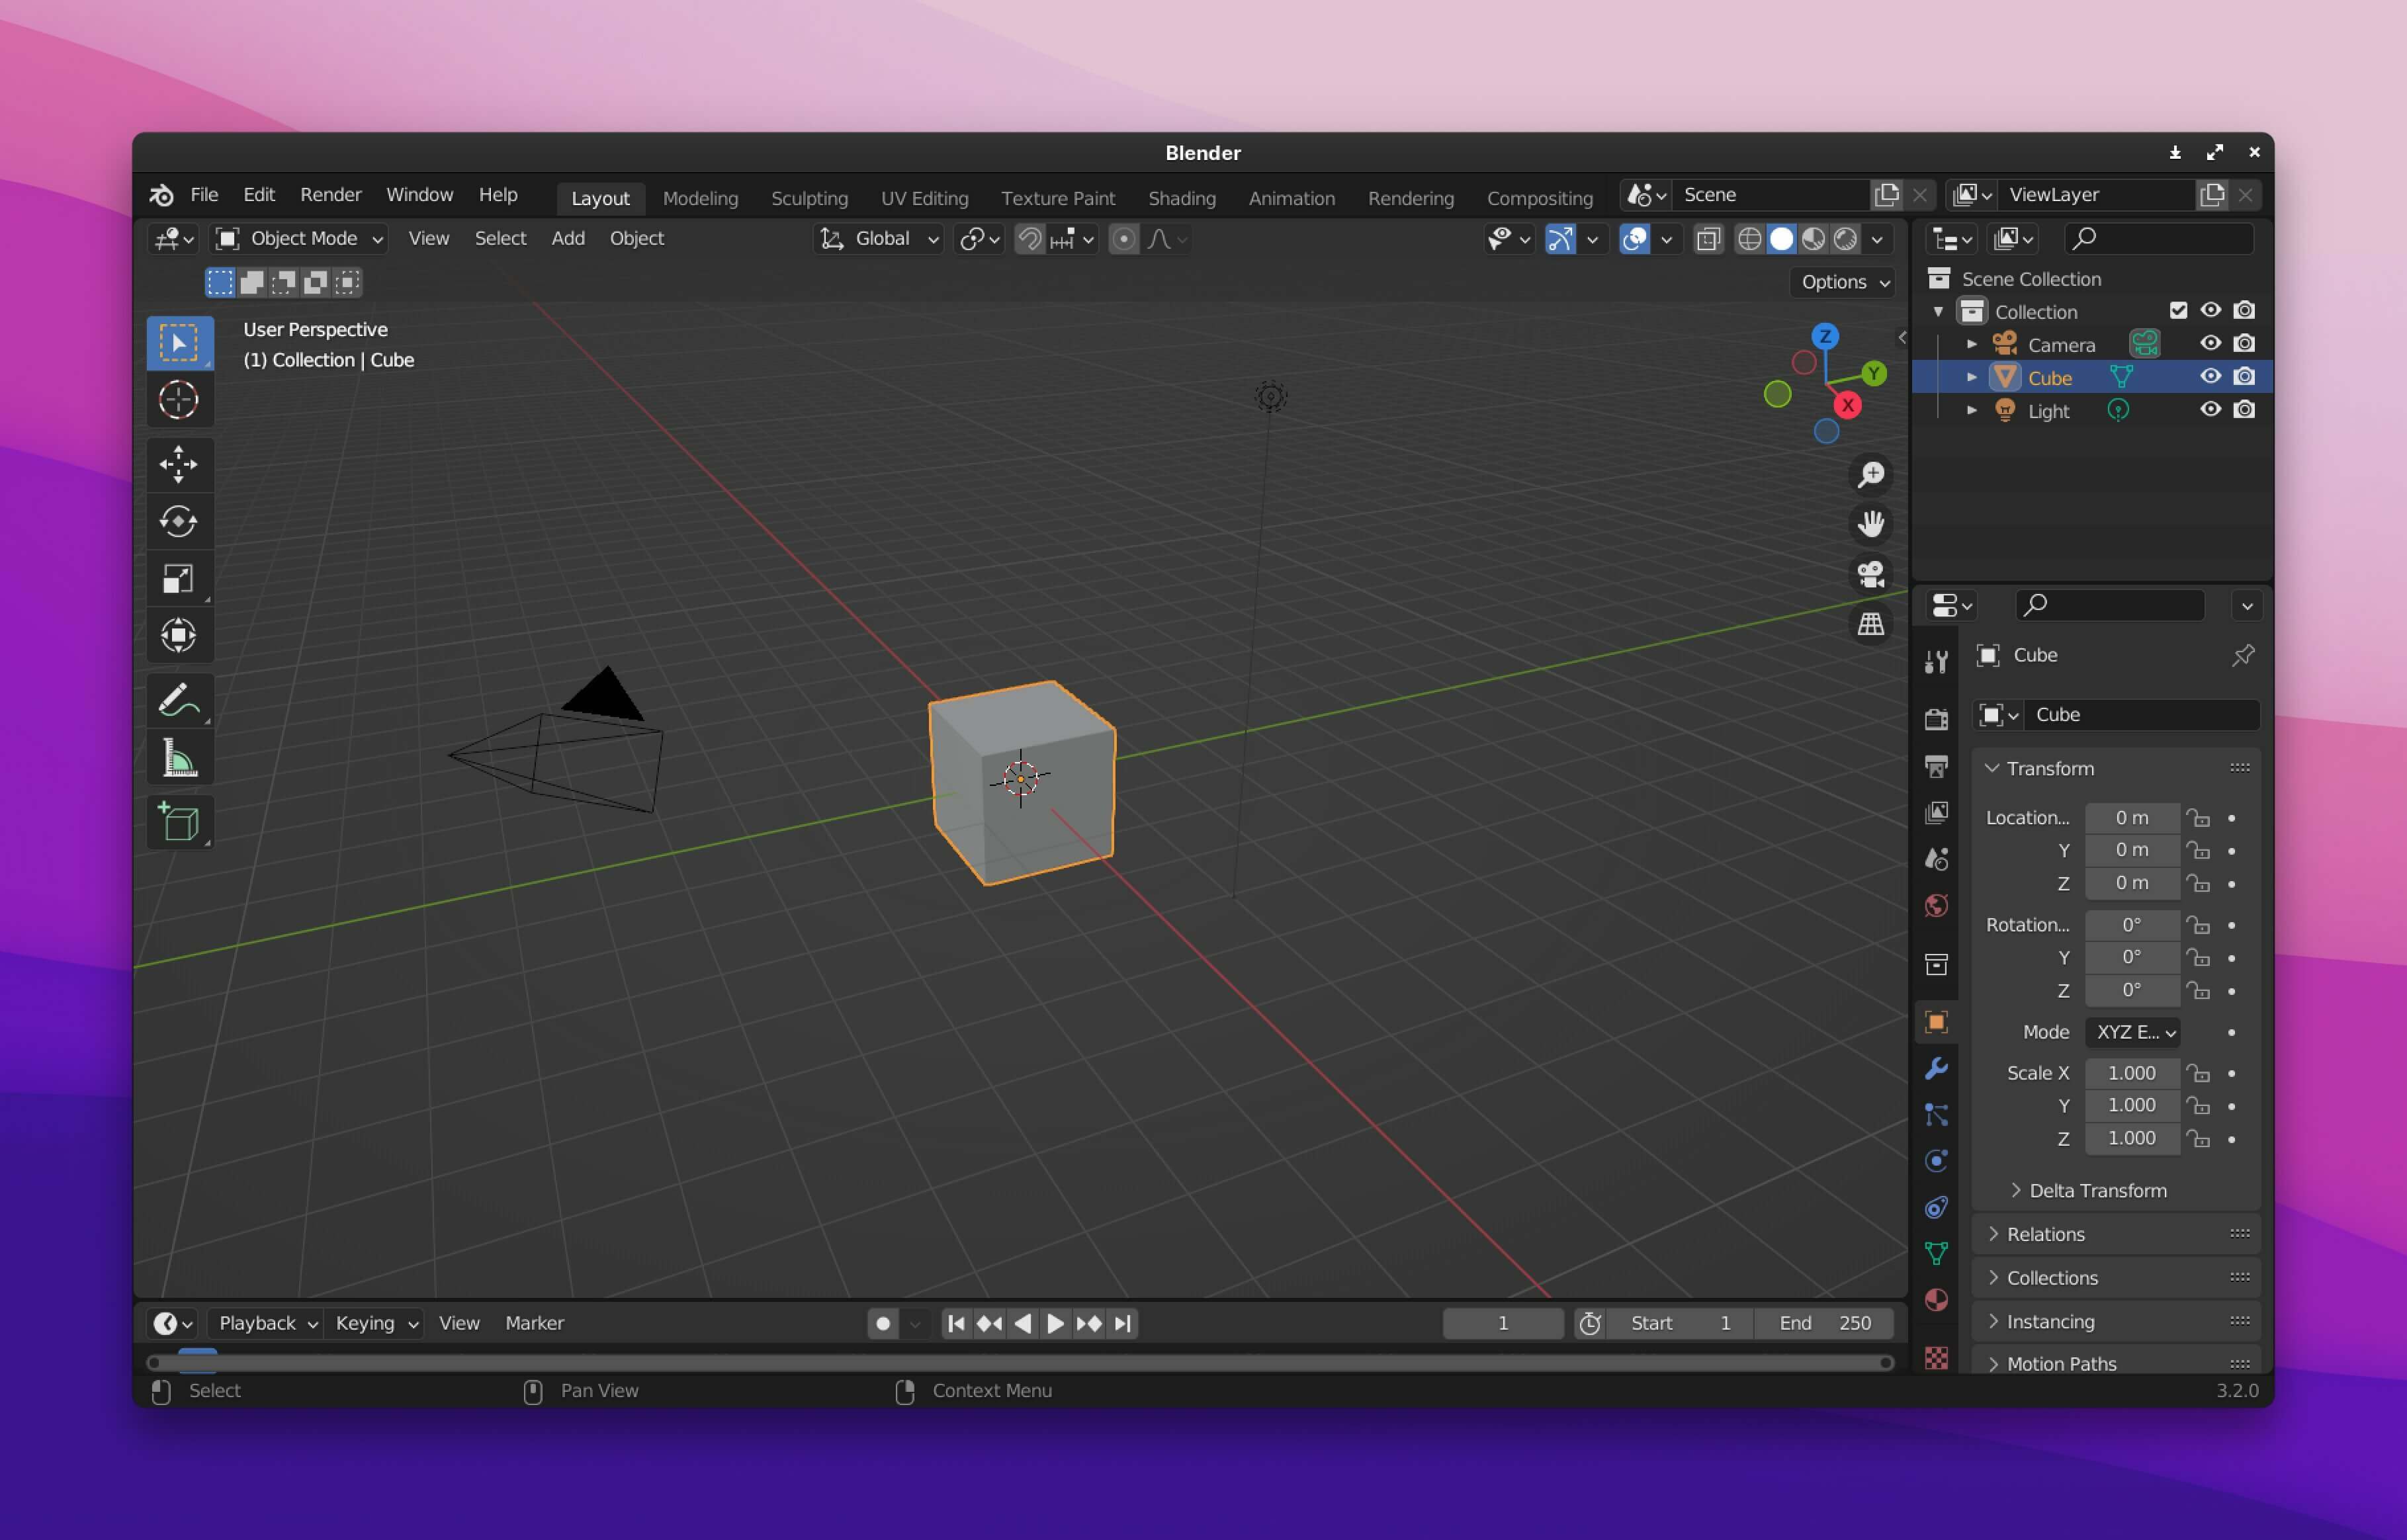 Today looks like a great day to start learning Blender 📦 - 9:31 AM - Jun 27, 2022 - Twitter